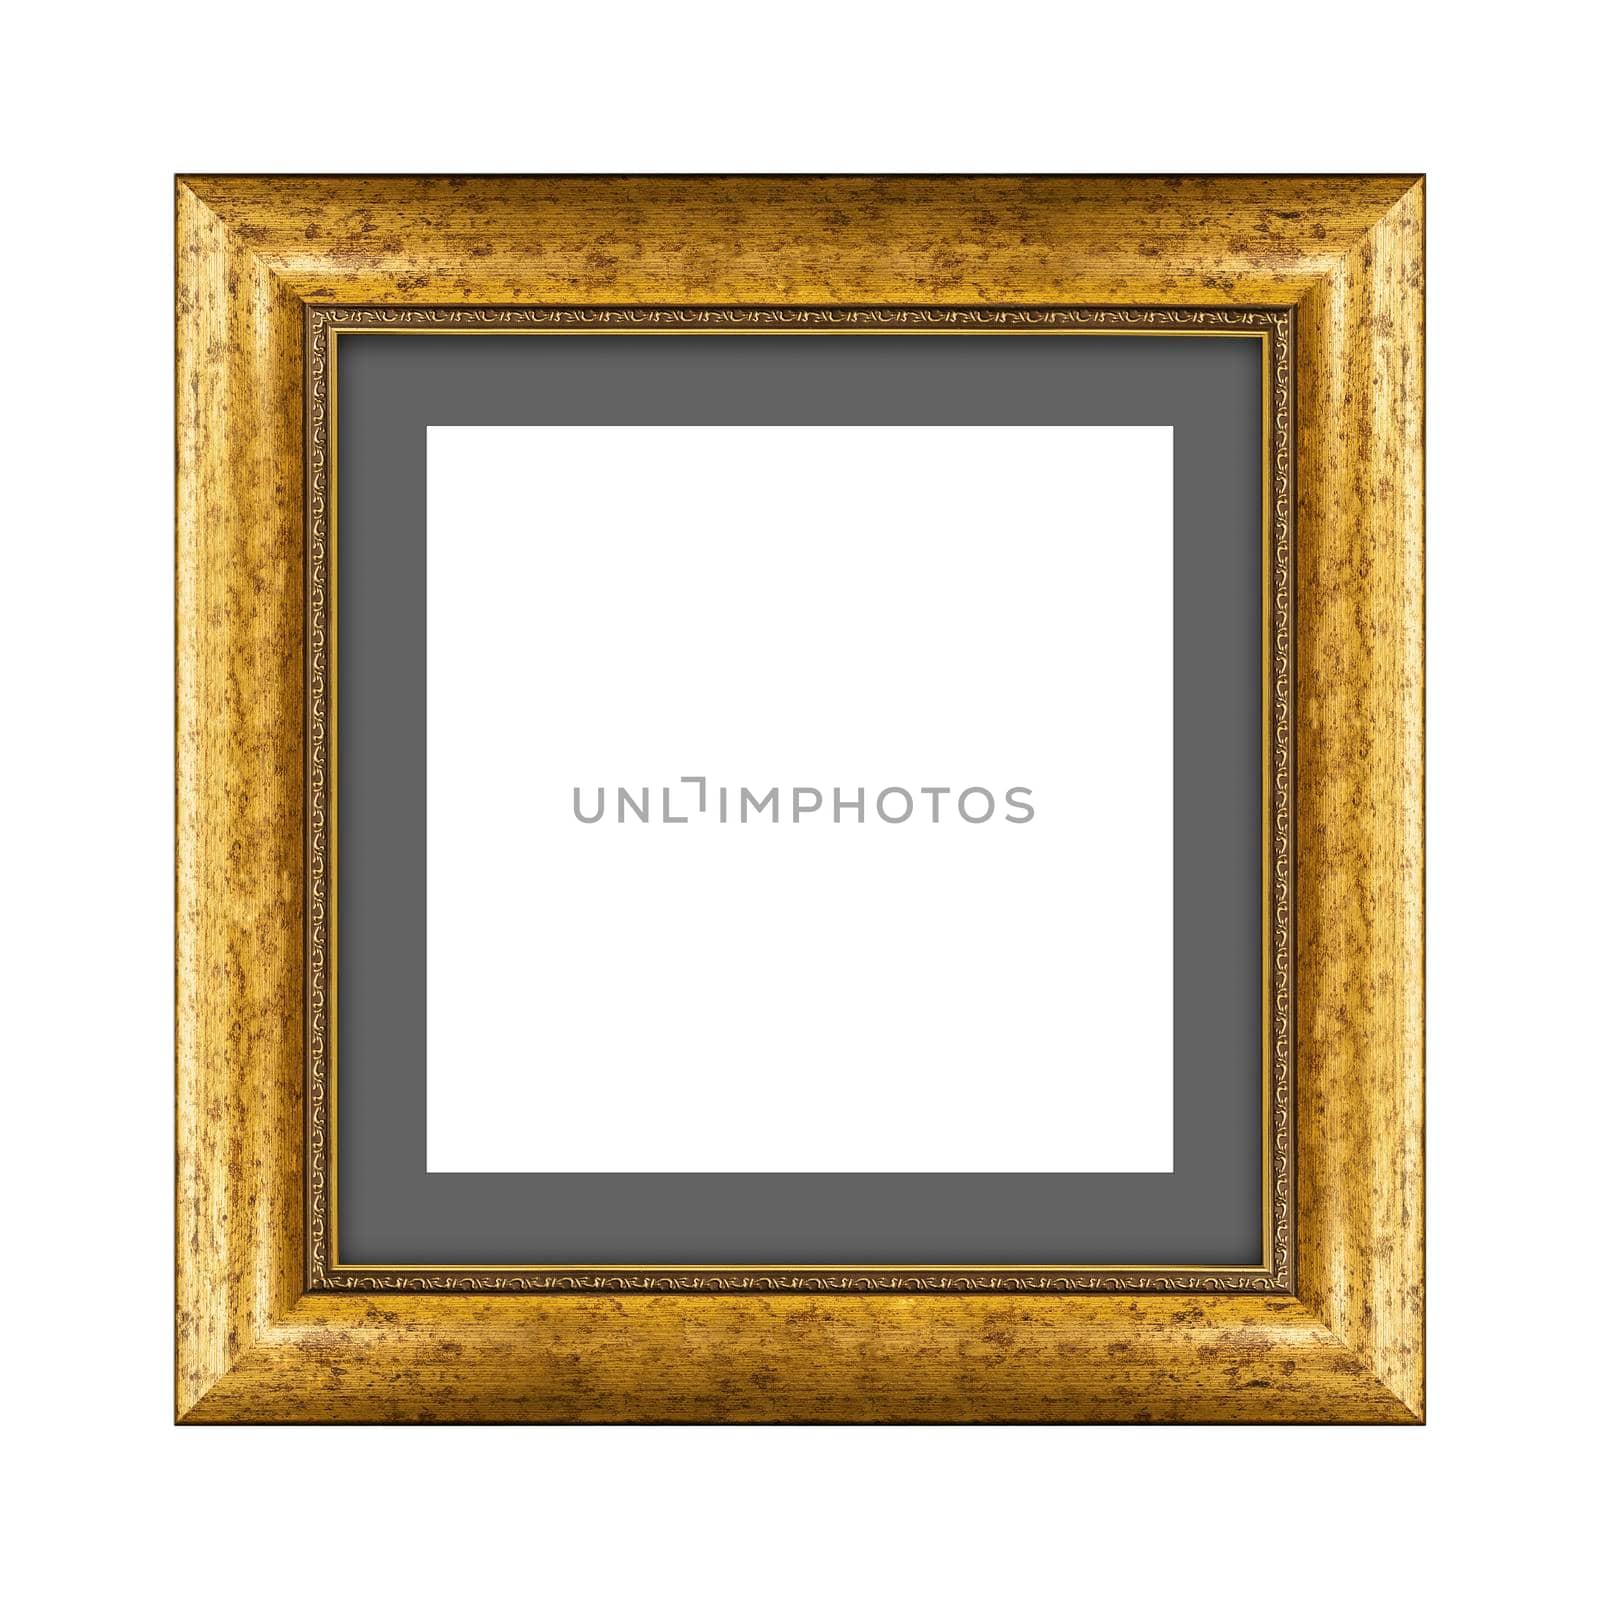 gold wooden frame for picture or photo, frame for a mirror isolated on white background. With clipping path